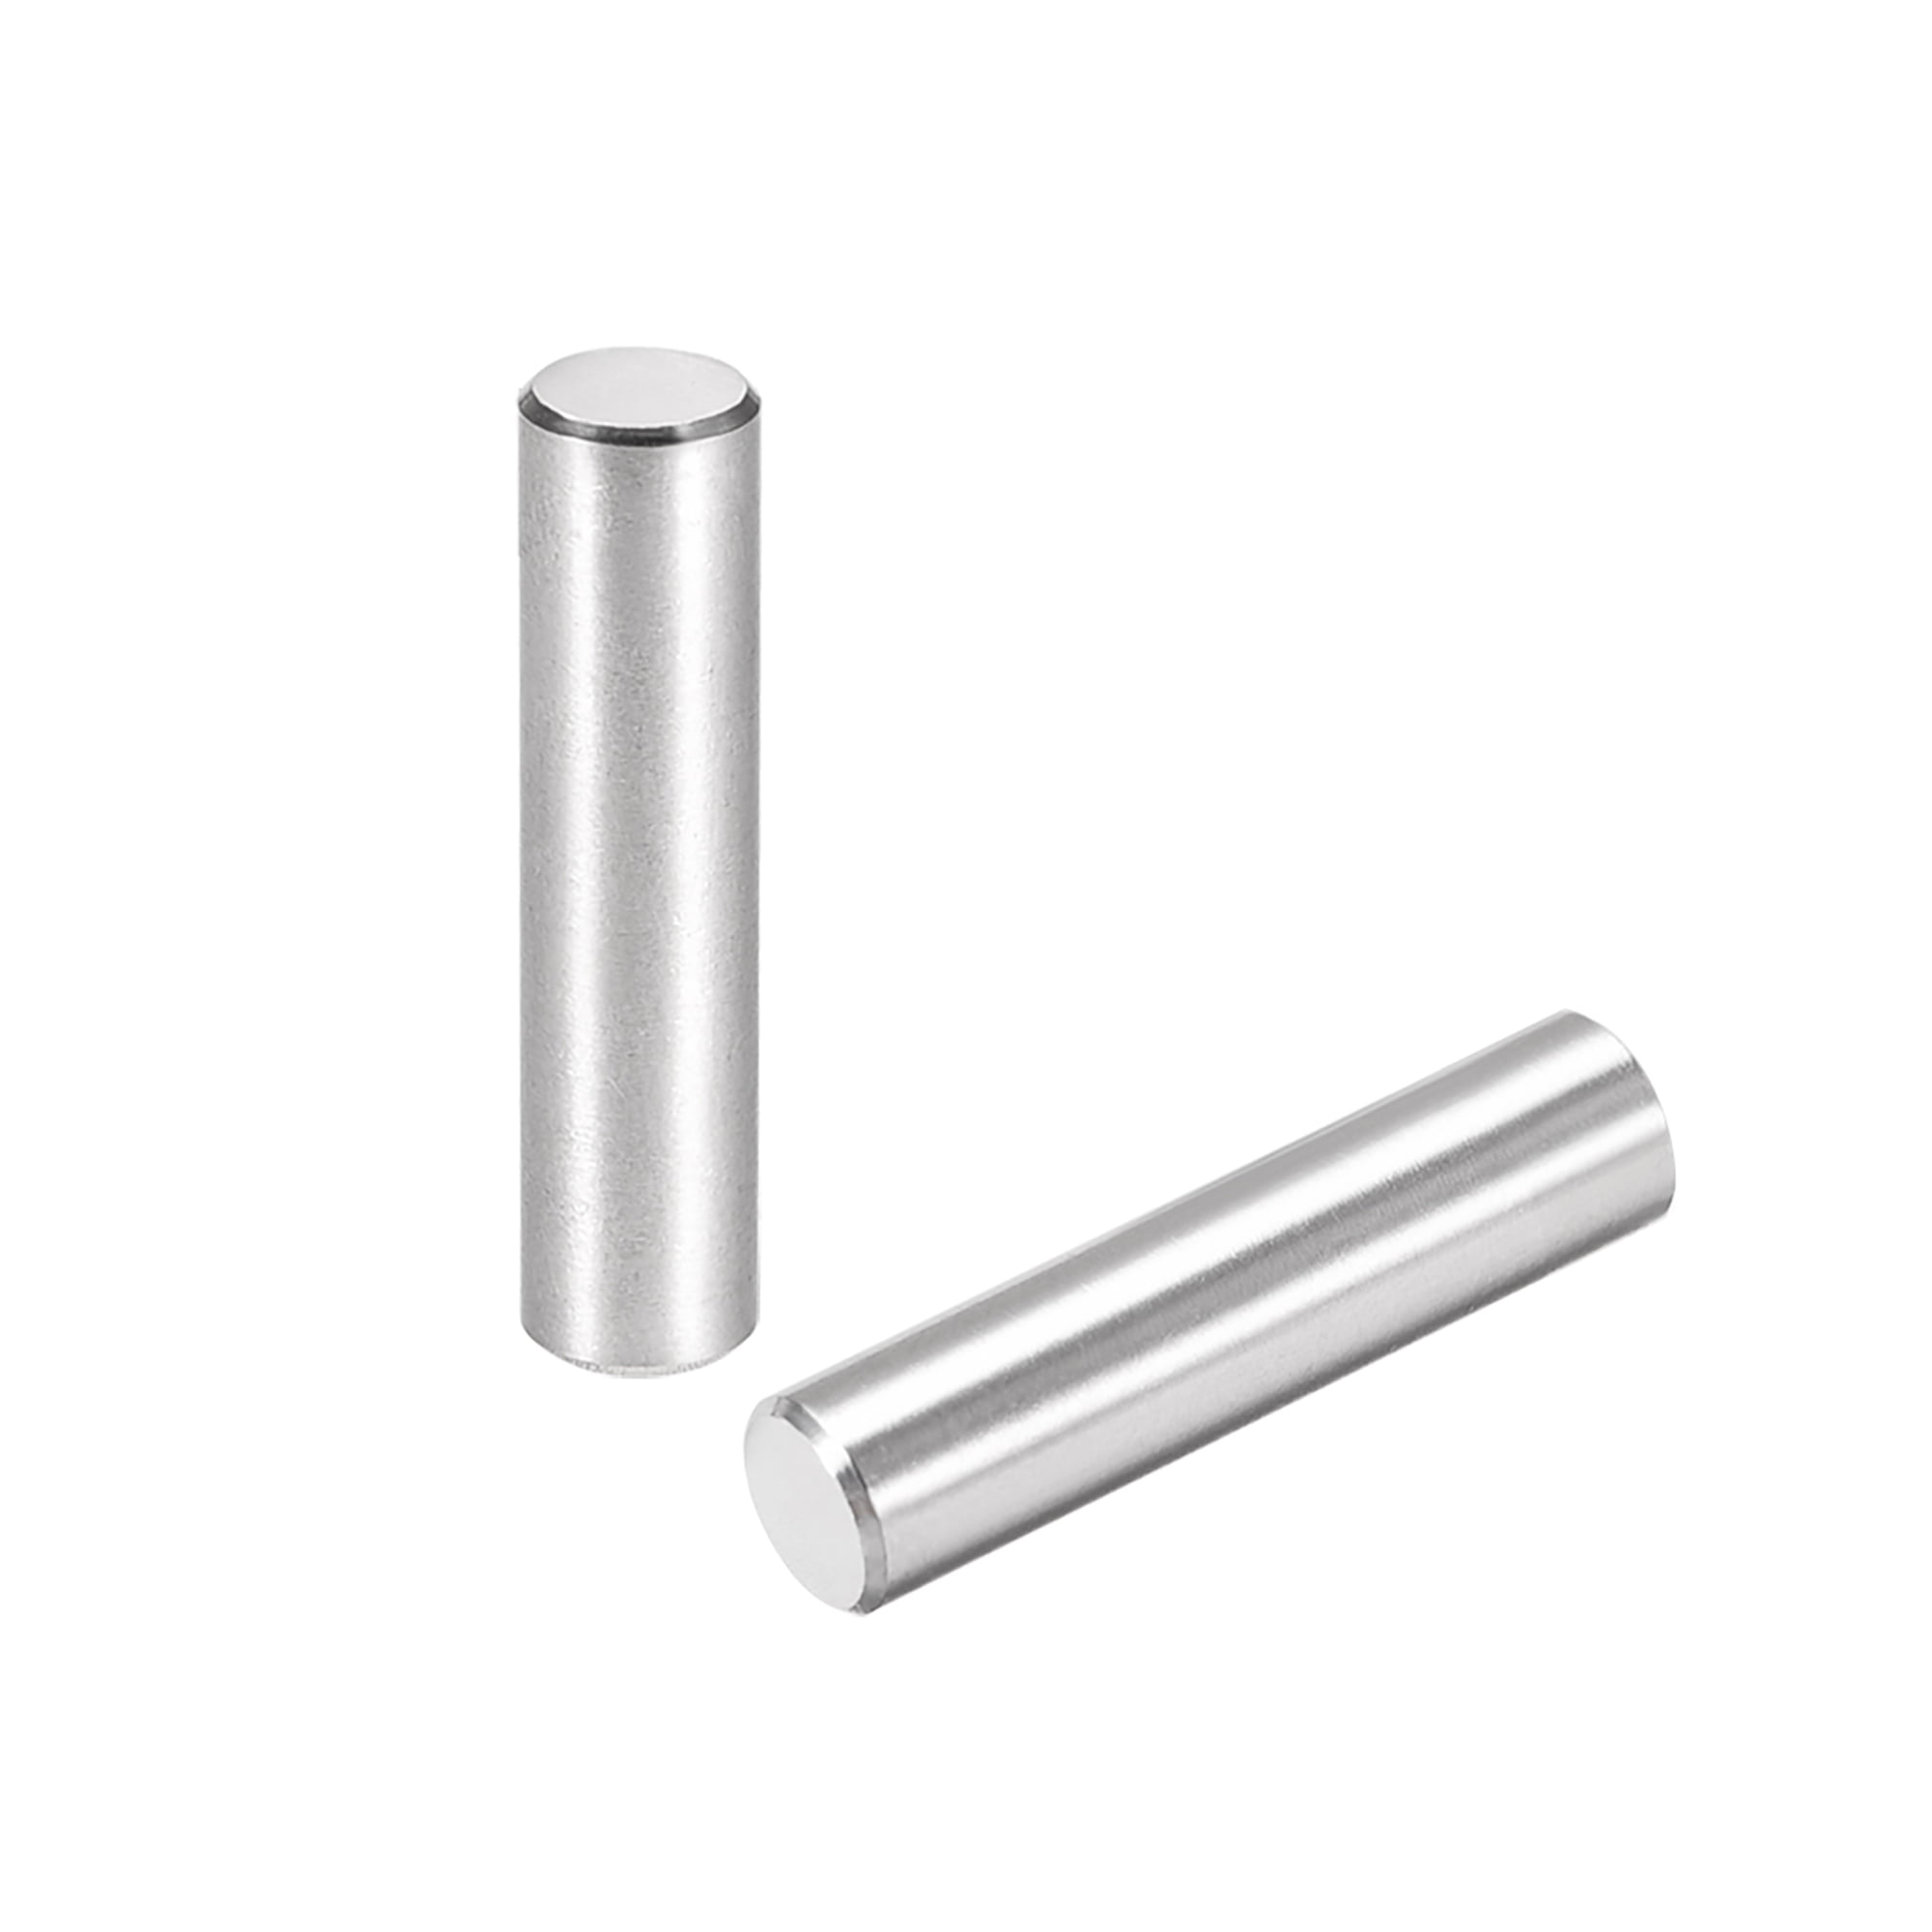 15 Pcs 6mm X 25mm Dowel Pin 304 Stainless Steel Cylindrical Shelf ...